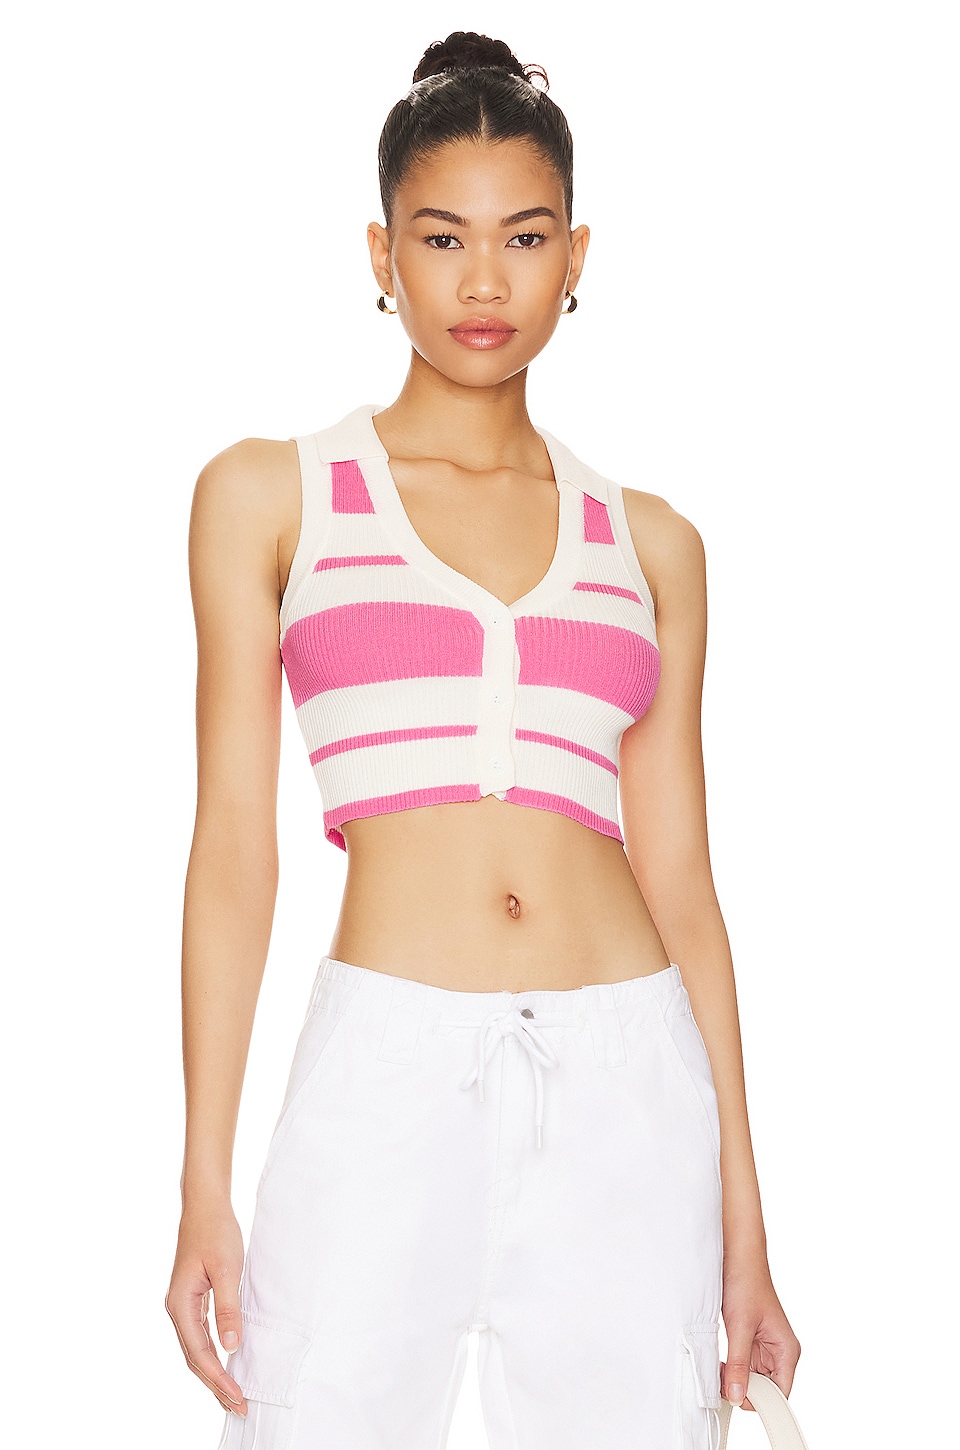 Топ MORE TO COME Candy Crop, цвет Pink Stripe топ more to come wyatt button down цвет hot pink